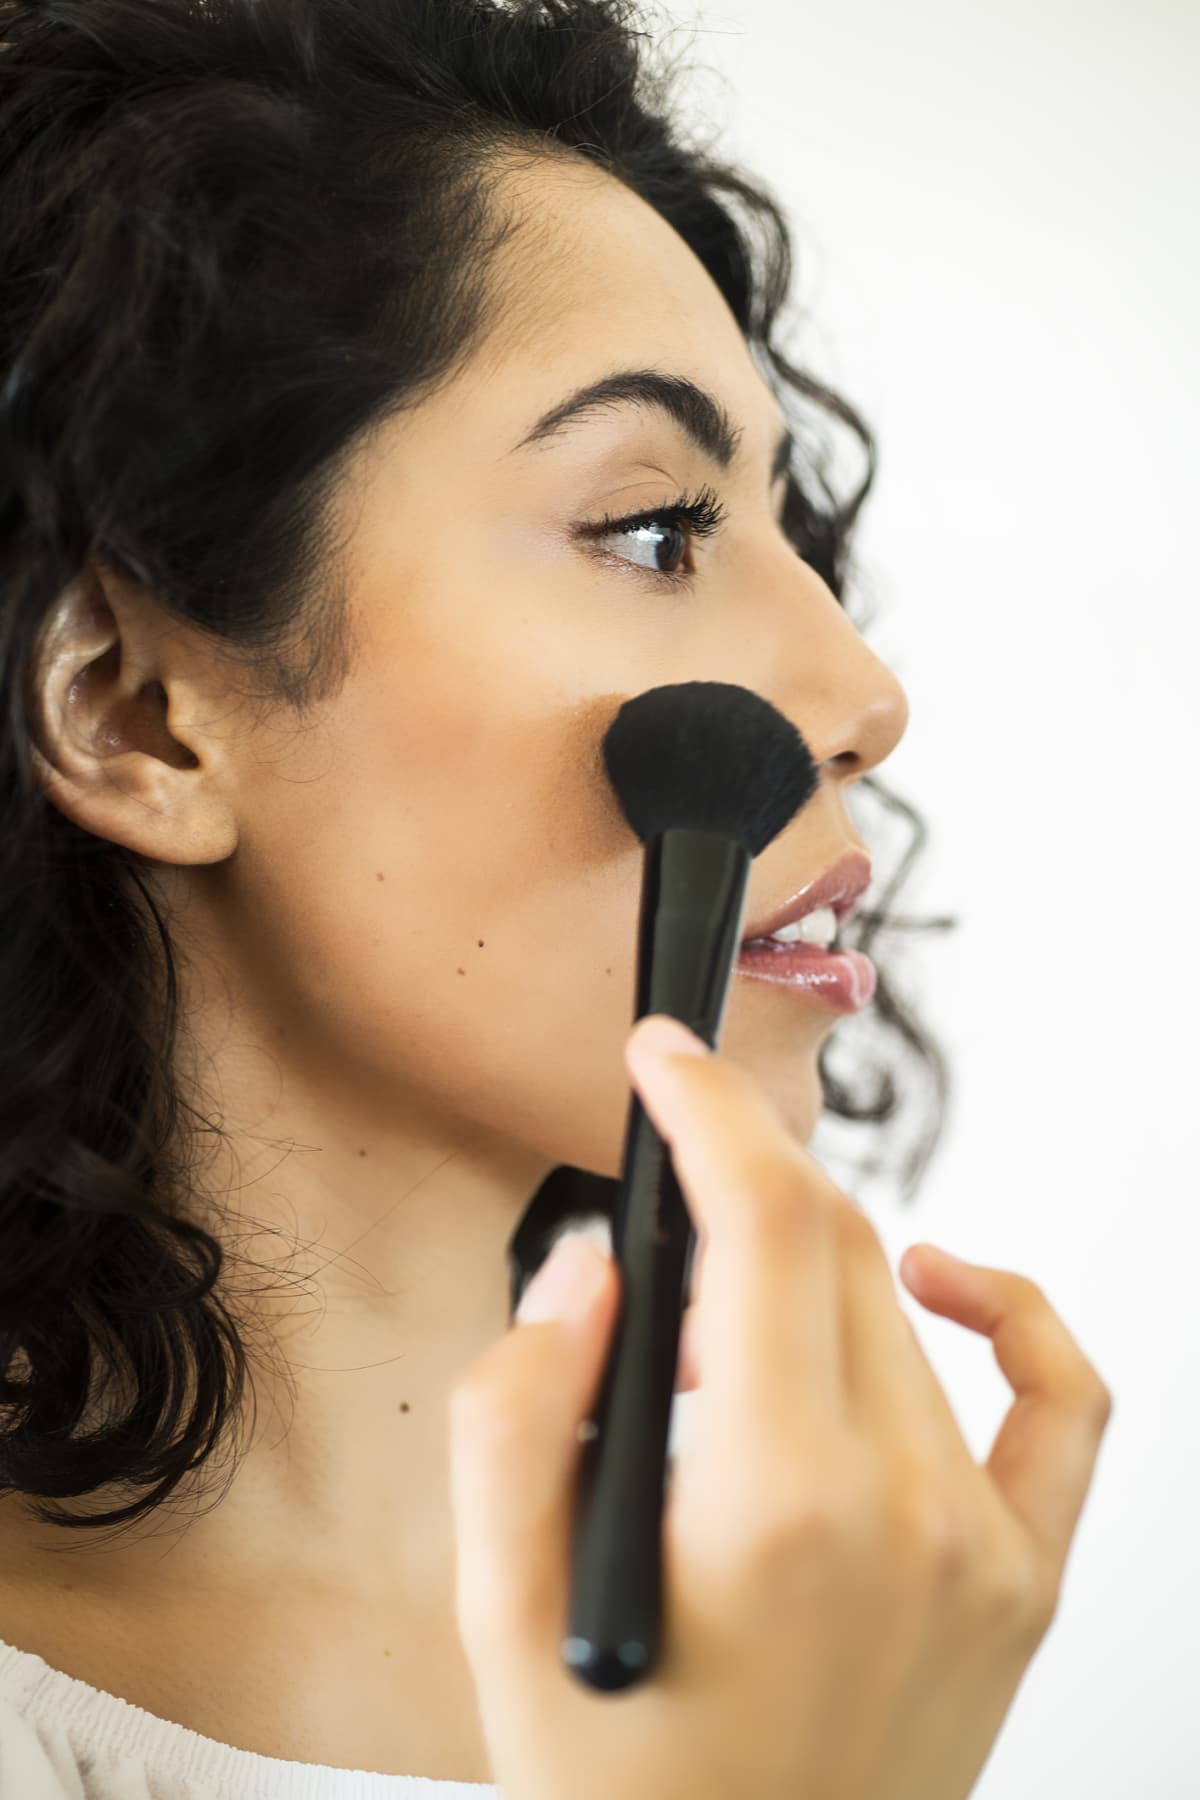 Latin young woman putting on makeup in front of the mirror